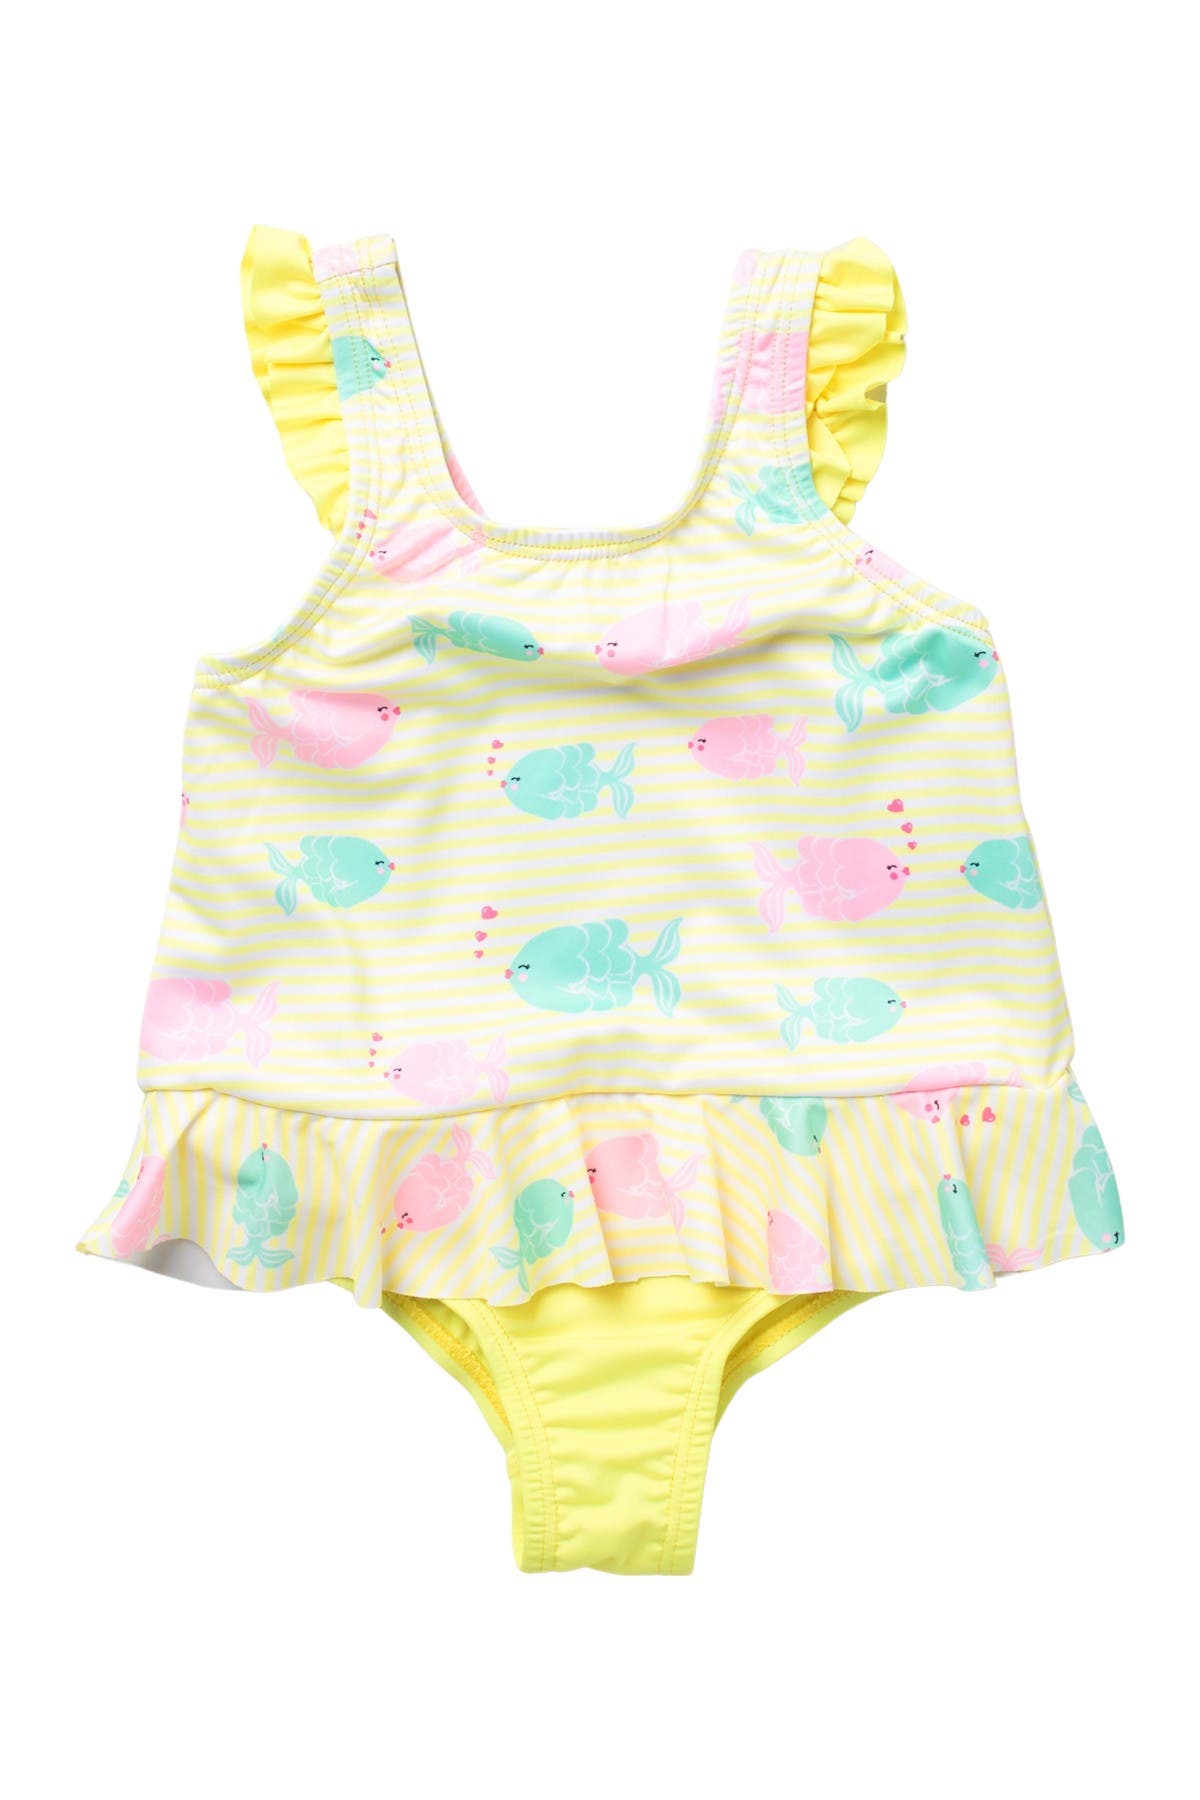 Wippette Girls Baby One Piece Swimsuits with Ruffle Trim